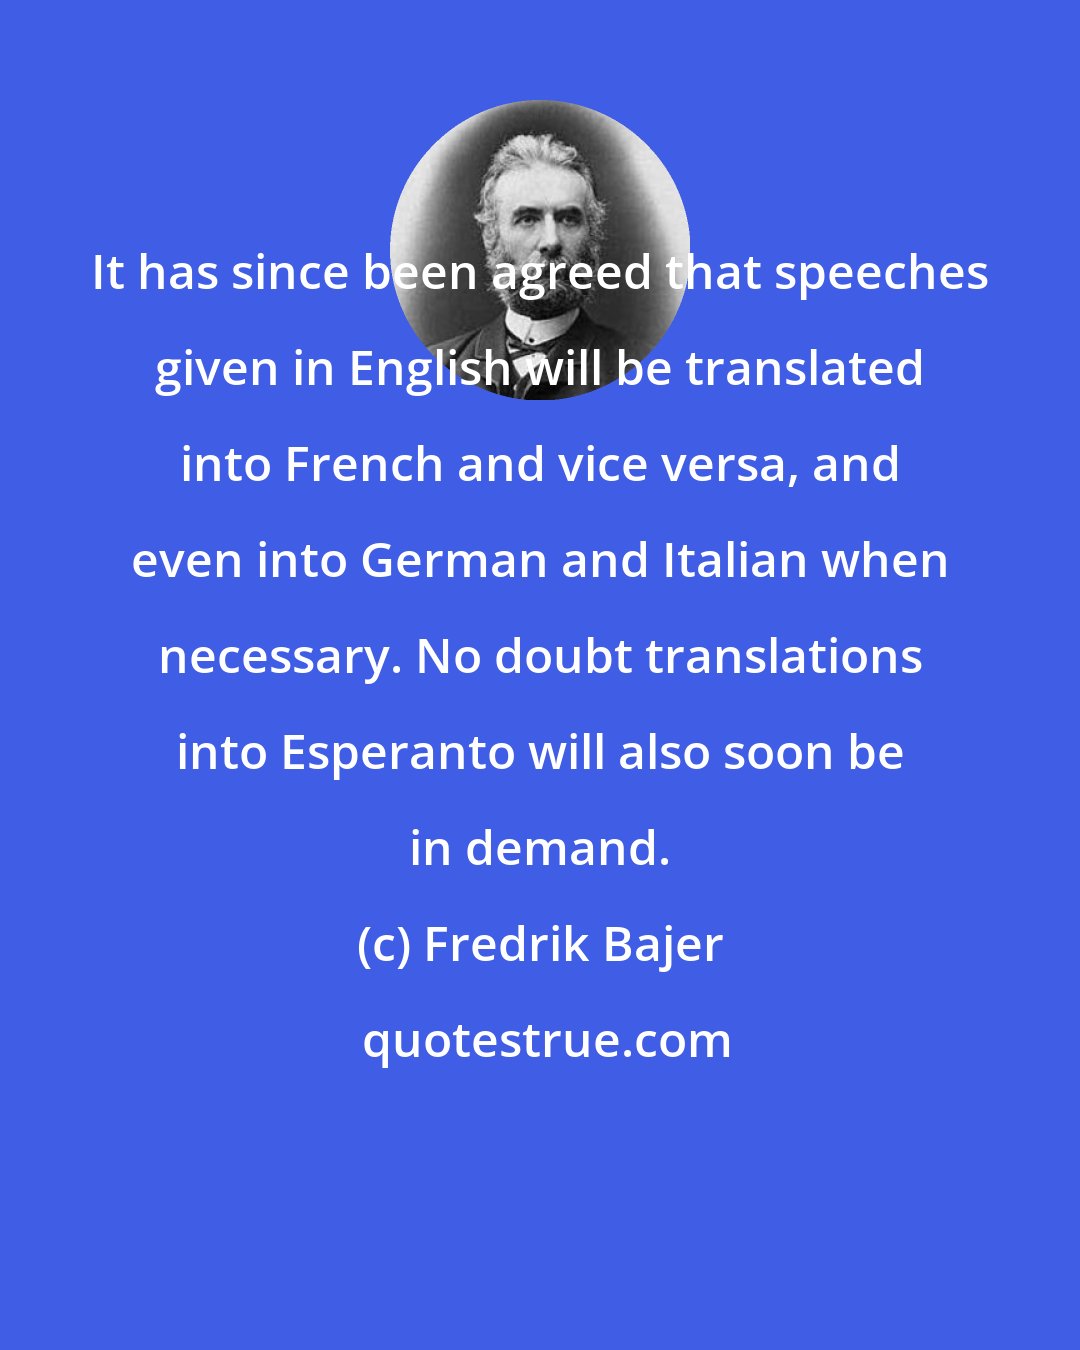 Fredrik Bajer: It has since been agreed that speeches given in English will be translated into French and vice versa, and even into German and Italian when necessary. No doubt translations into Esperanto will also soon be in demand.